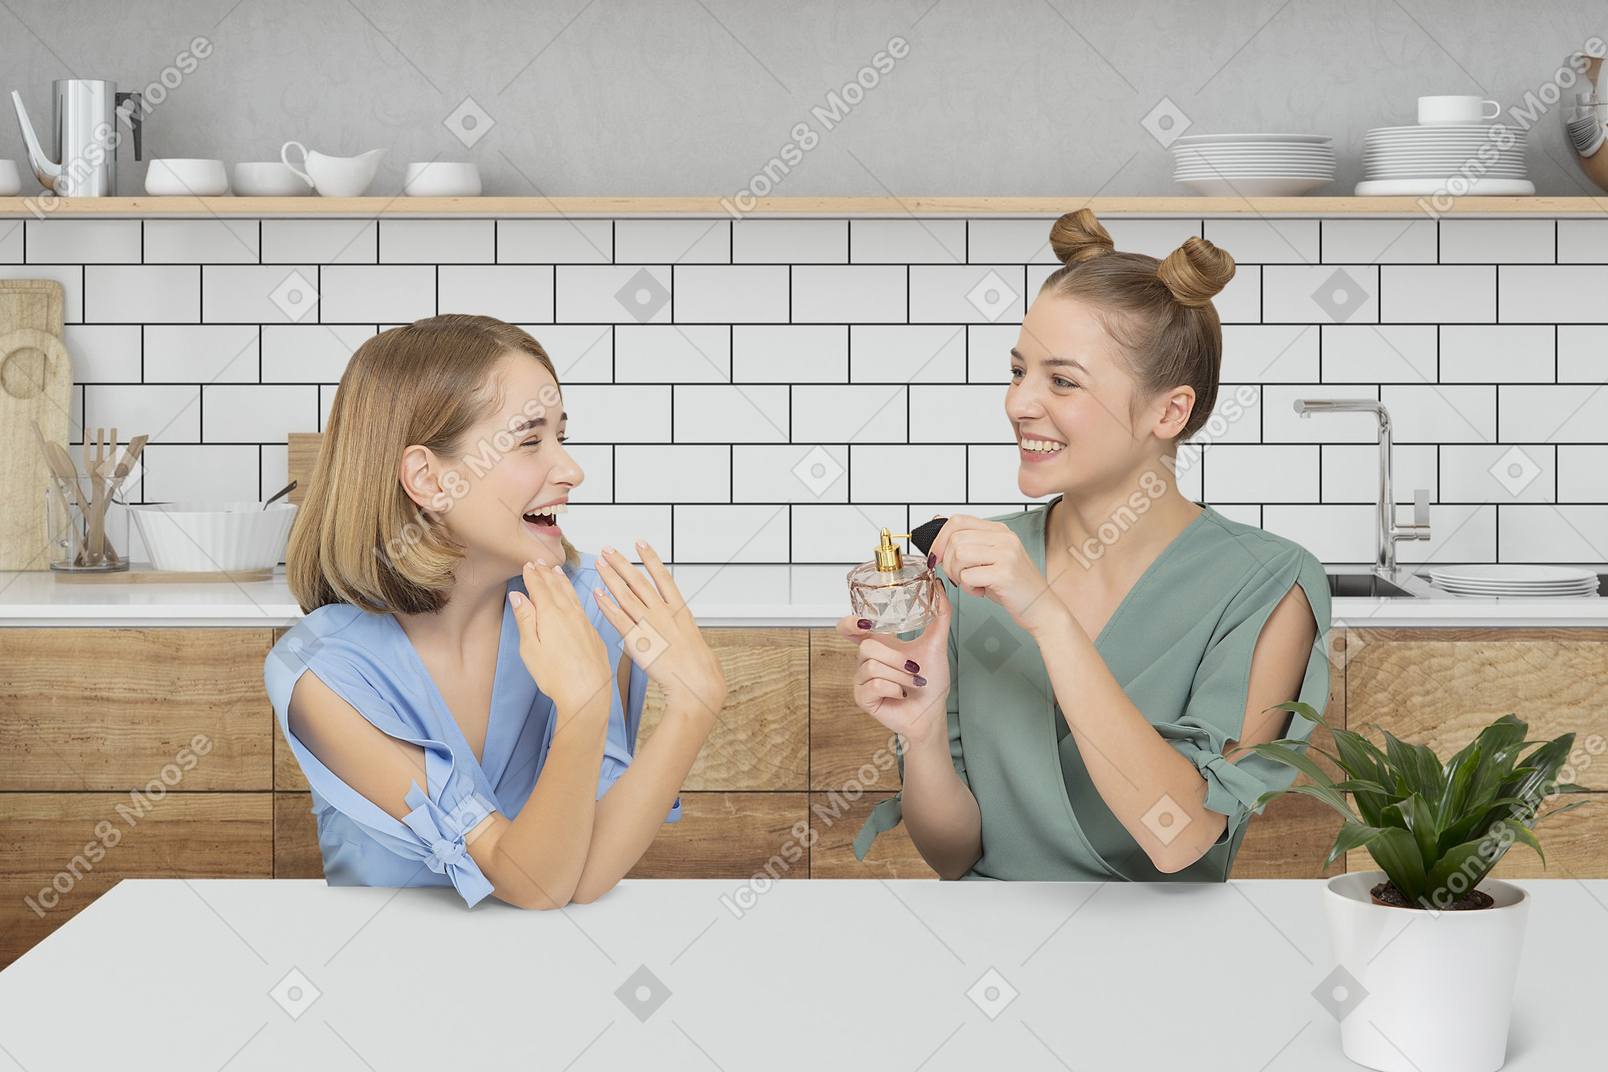 Two women sitting at a table and trying perfume